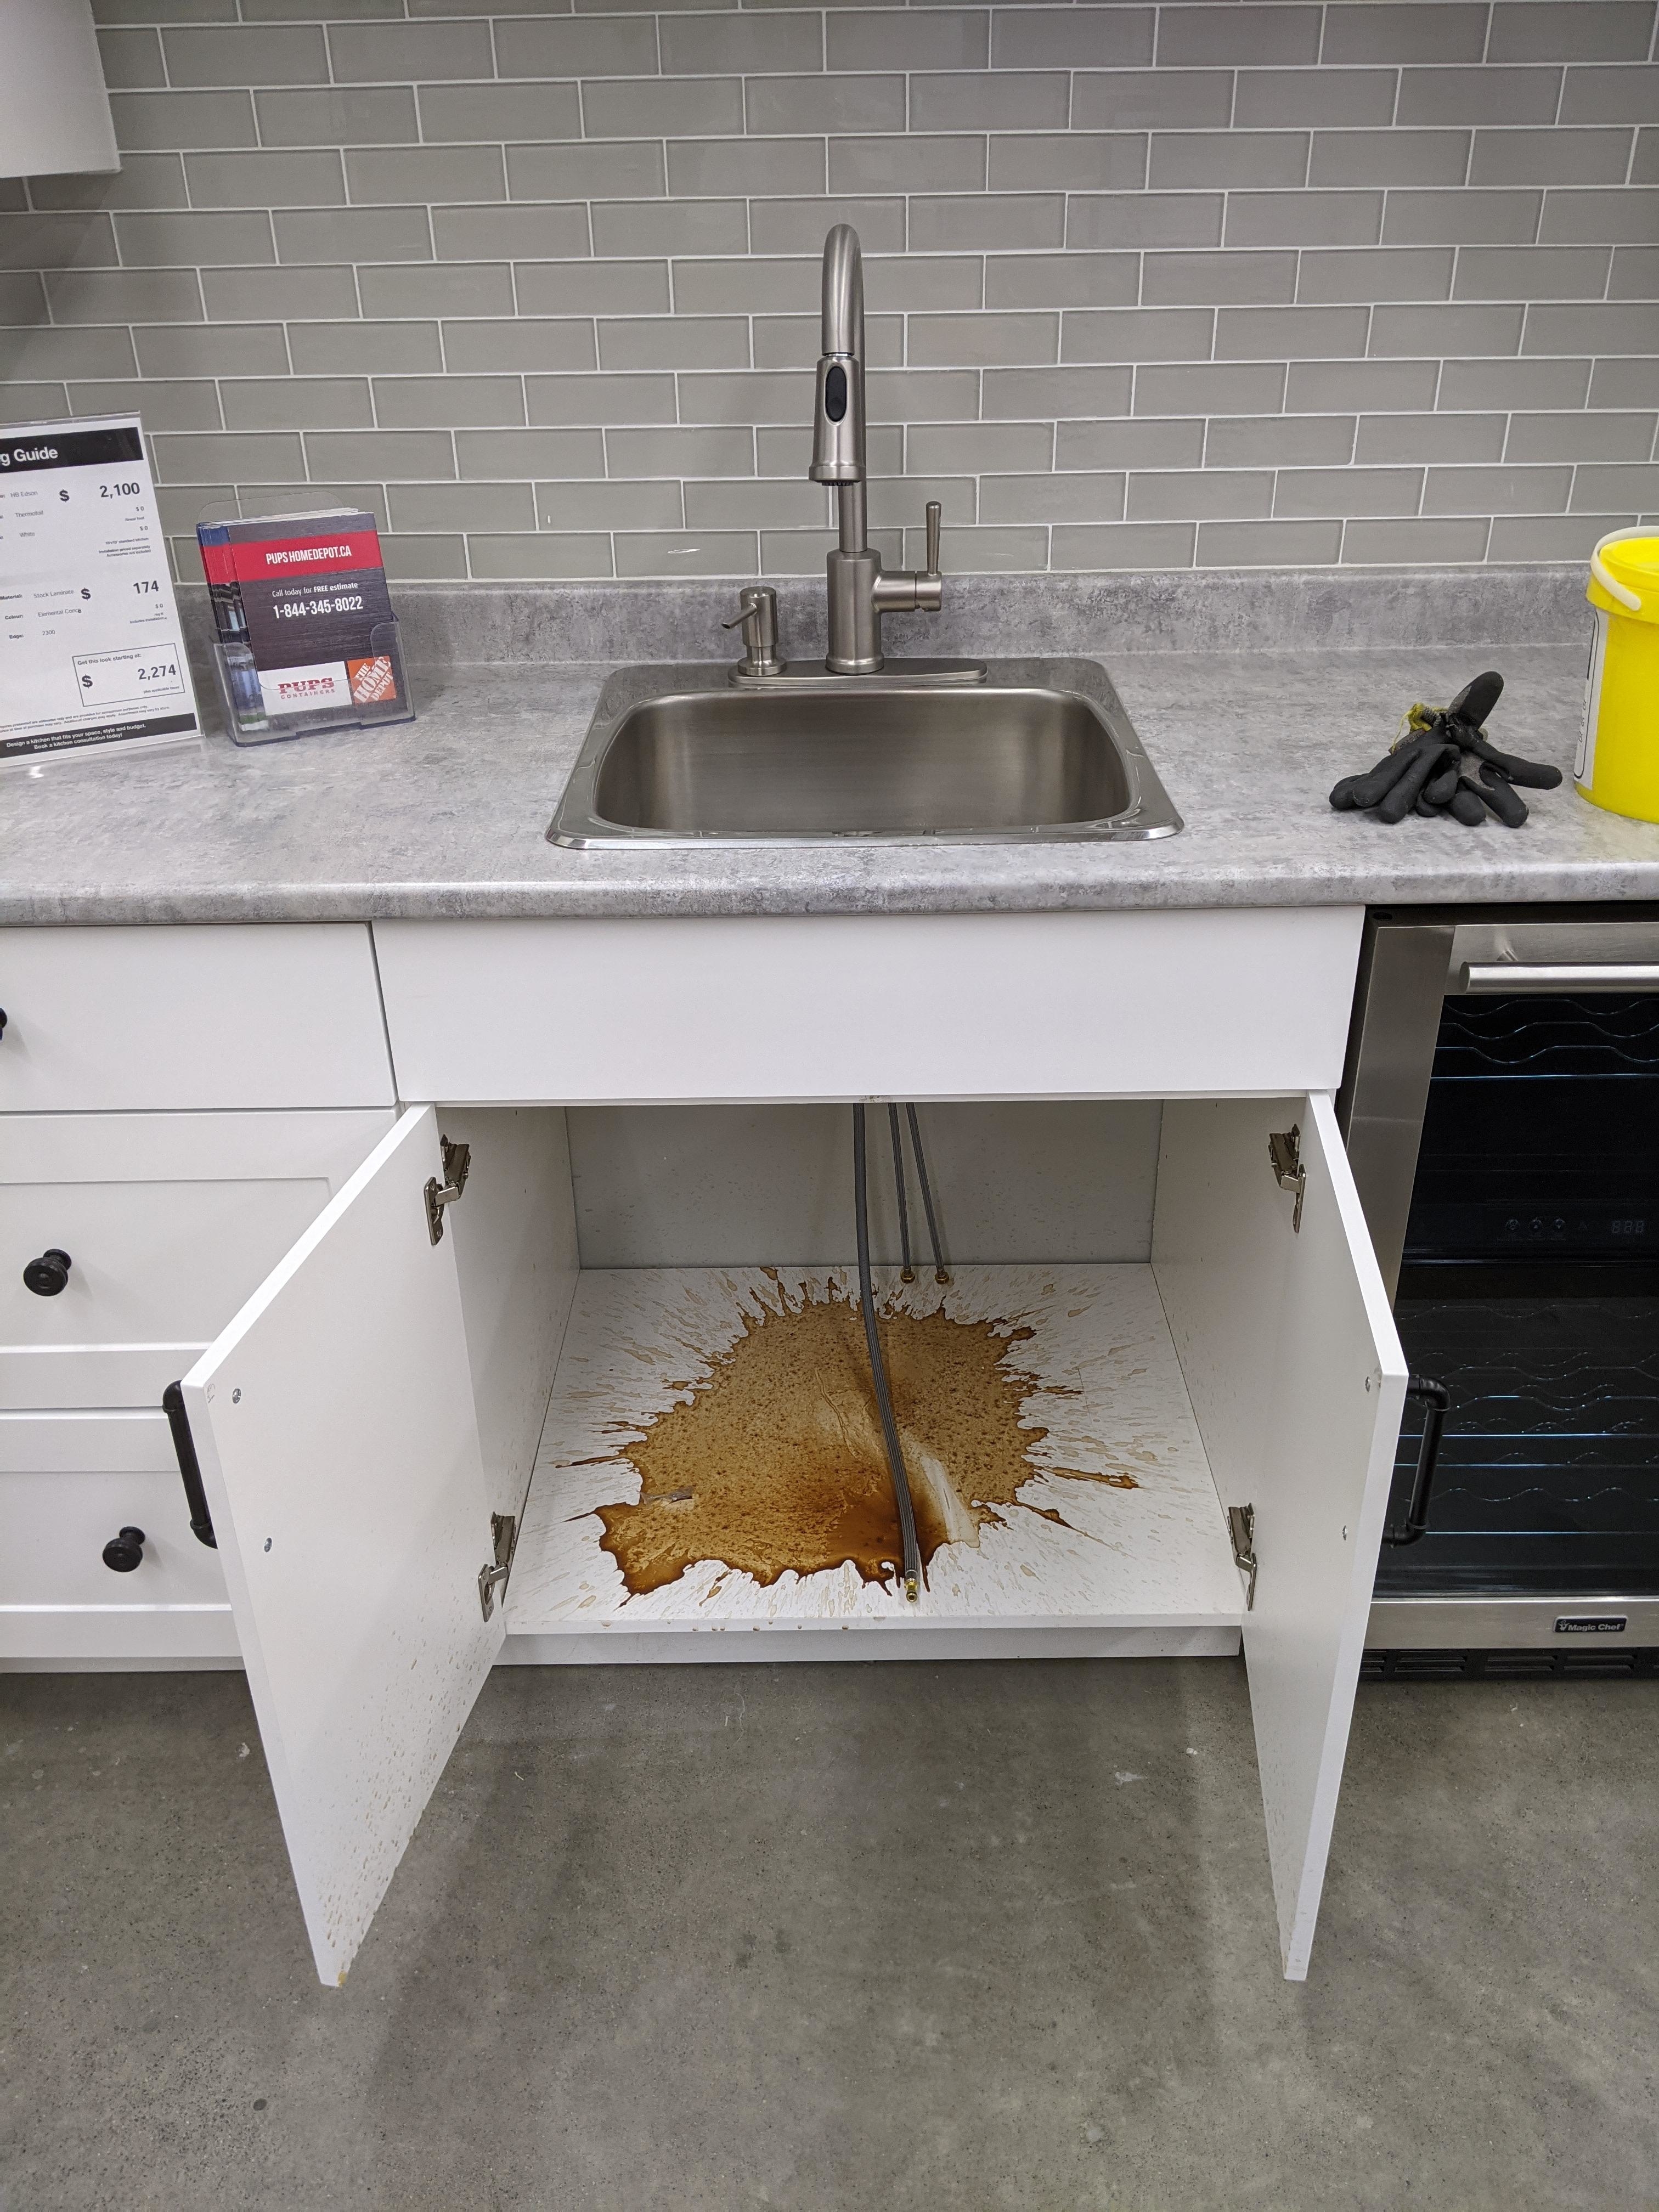 Sink overflows with brown liquid into an open cabinet below, creating a large spill. Countertop items include a box, towels, and a yellow bucket on the right